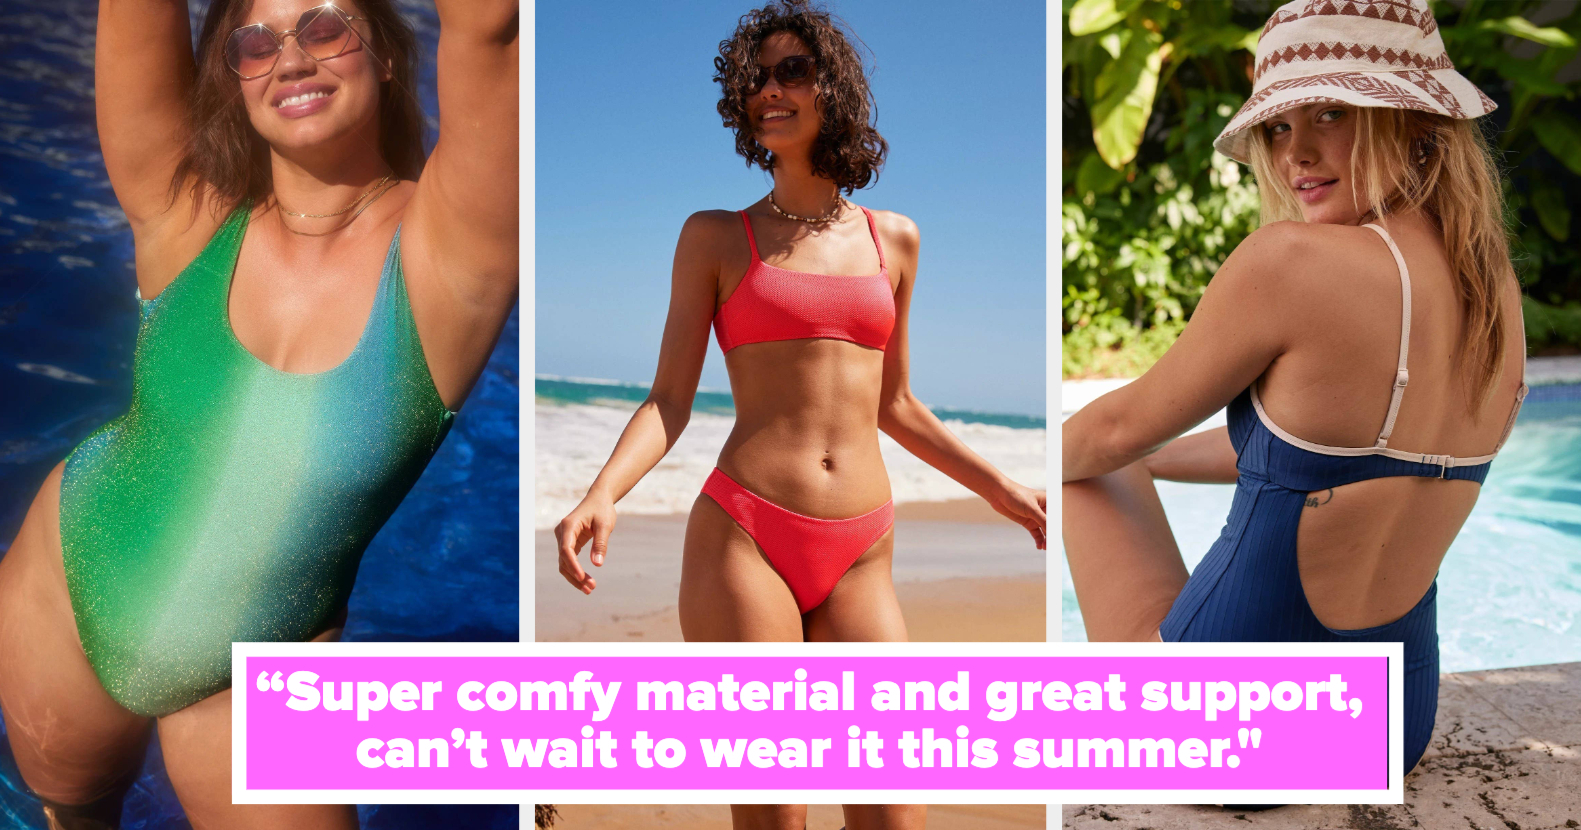 Swimsuit season is almost here. Well, we've got your back and your